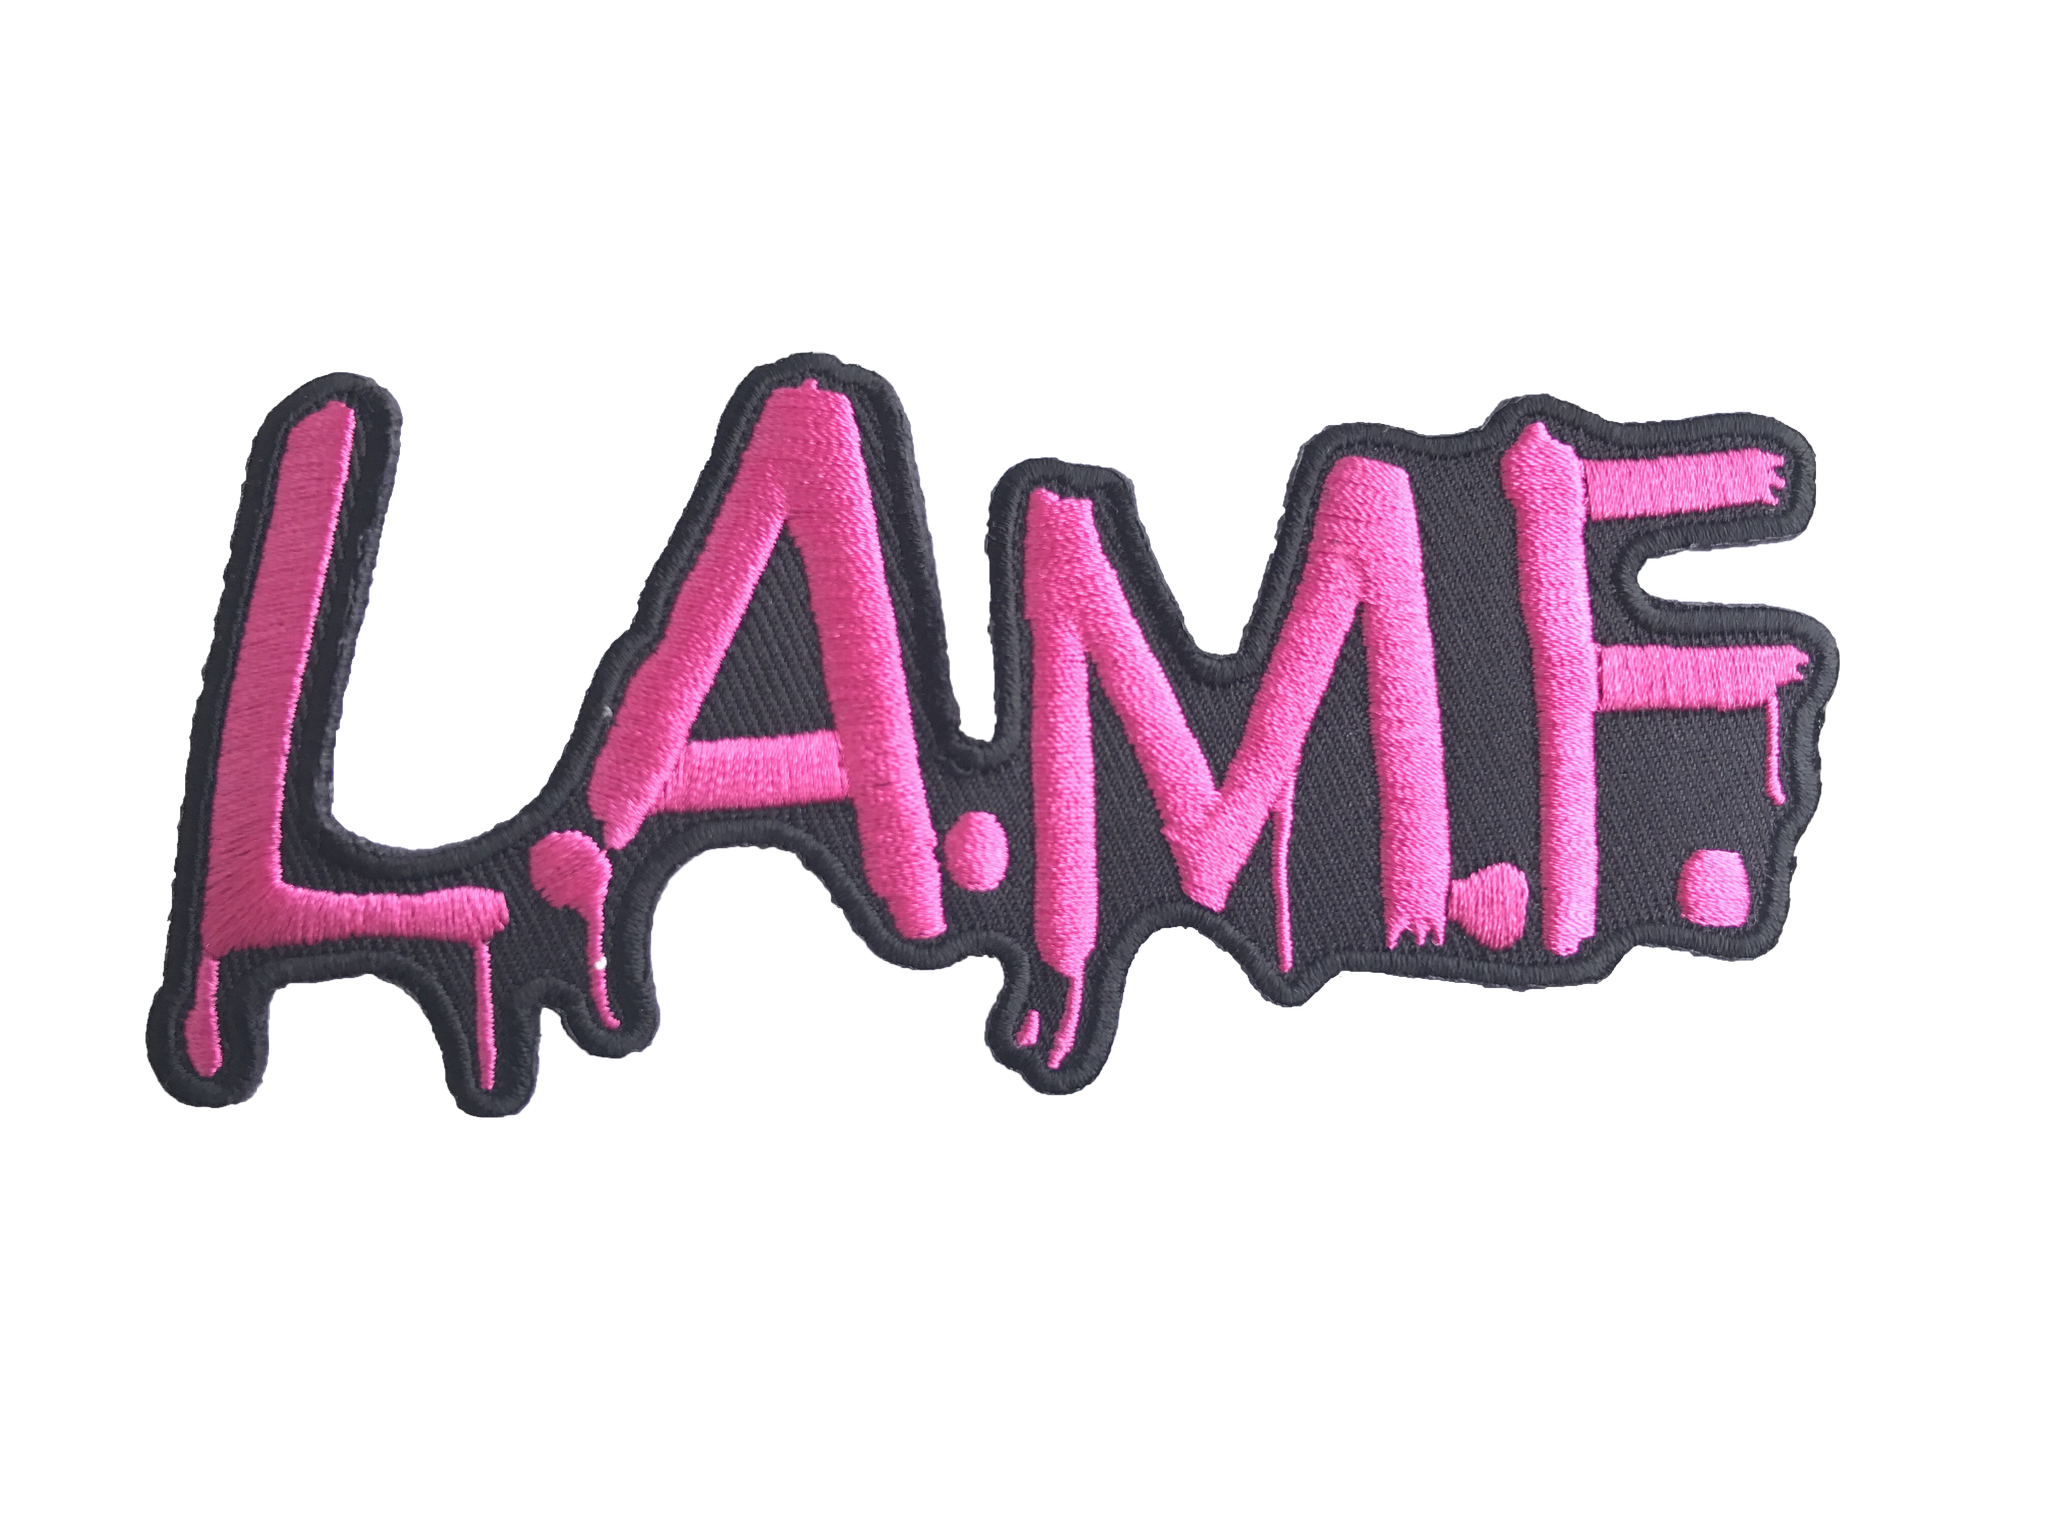 JOHNNY THUNDERS "LAMF" EMBROIDERED LOGO PATCH